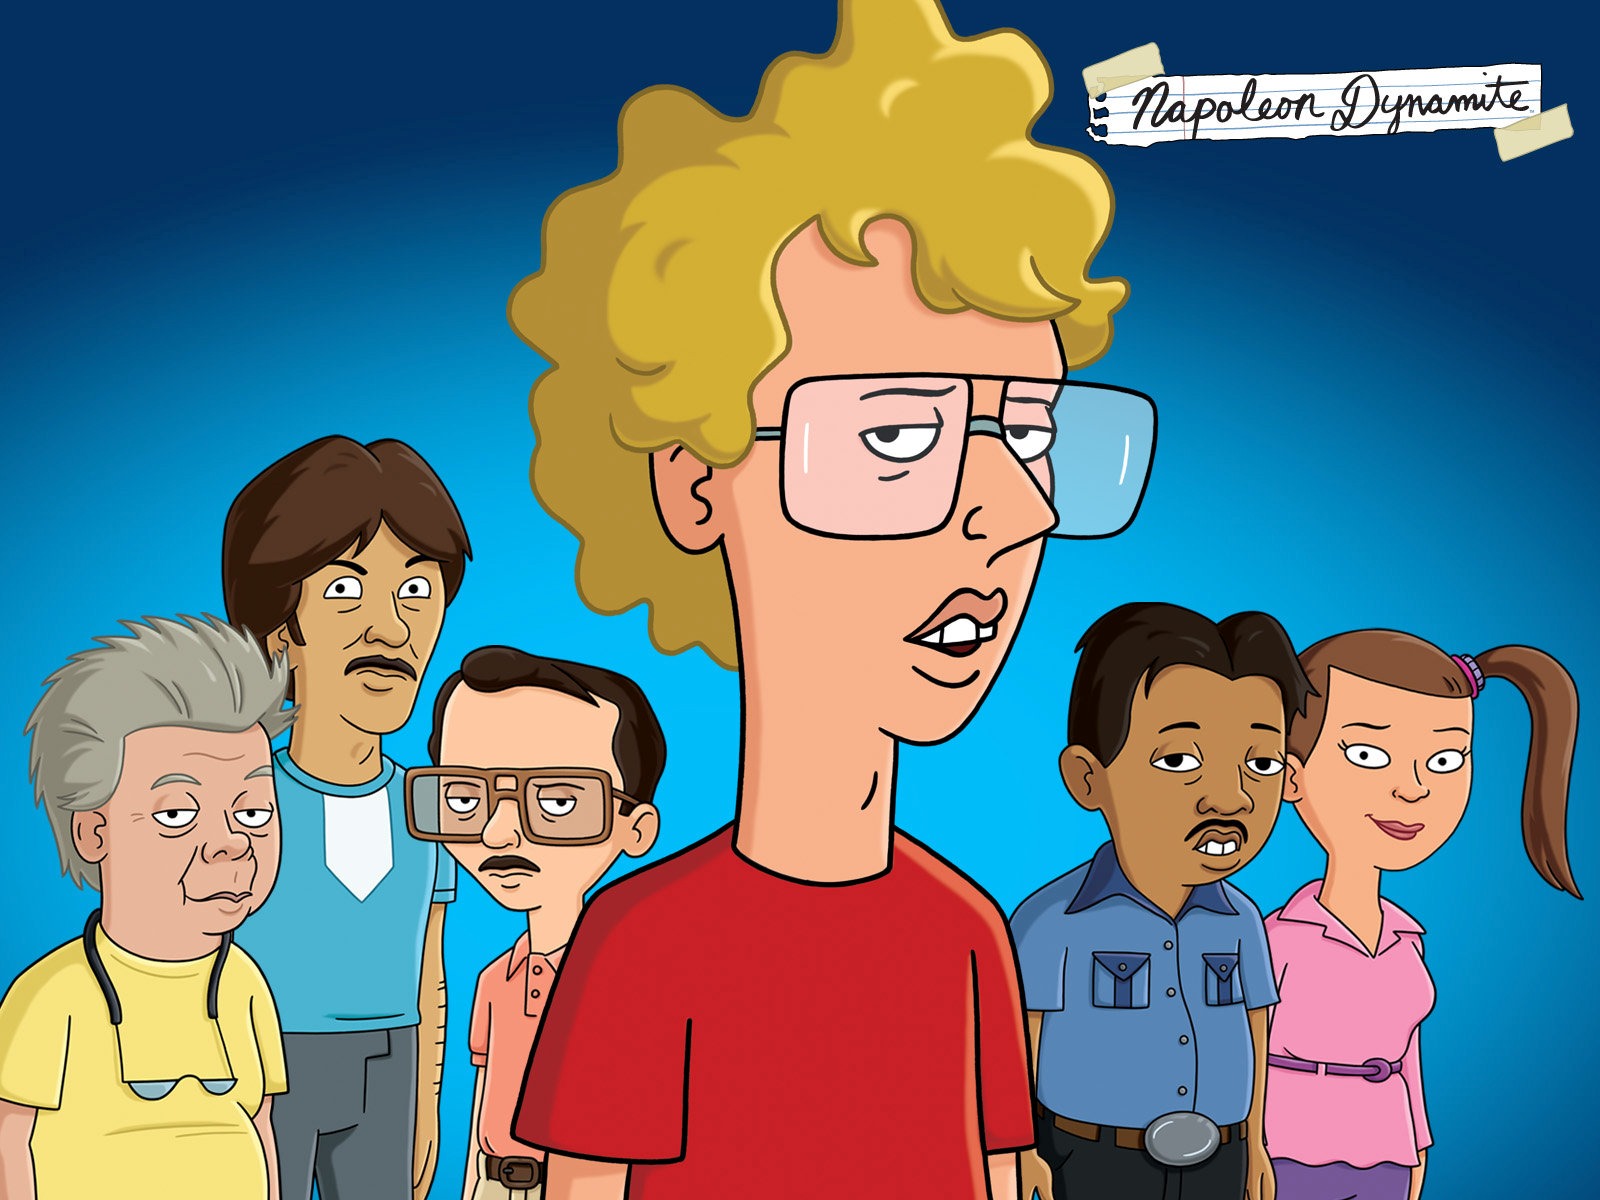 19-facts-about-napoleon-dynamite-napoleon-dynamite-the-animated-series